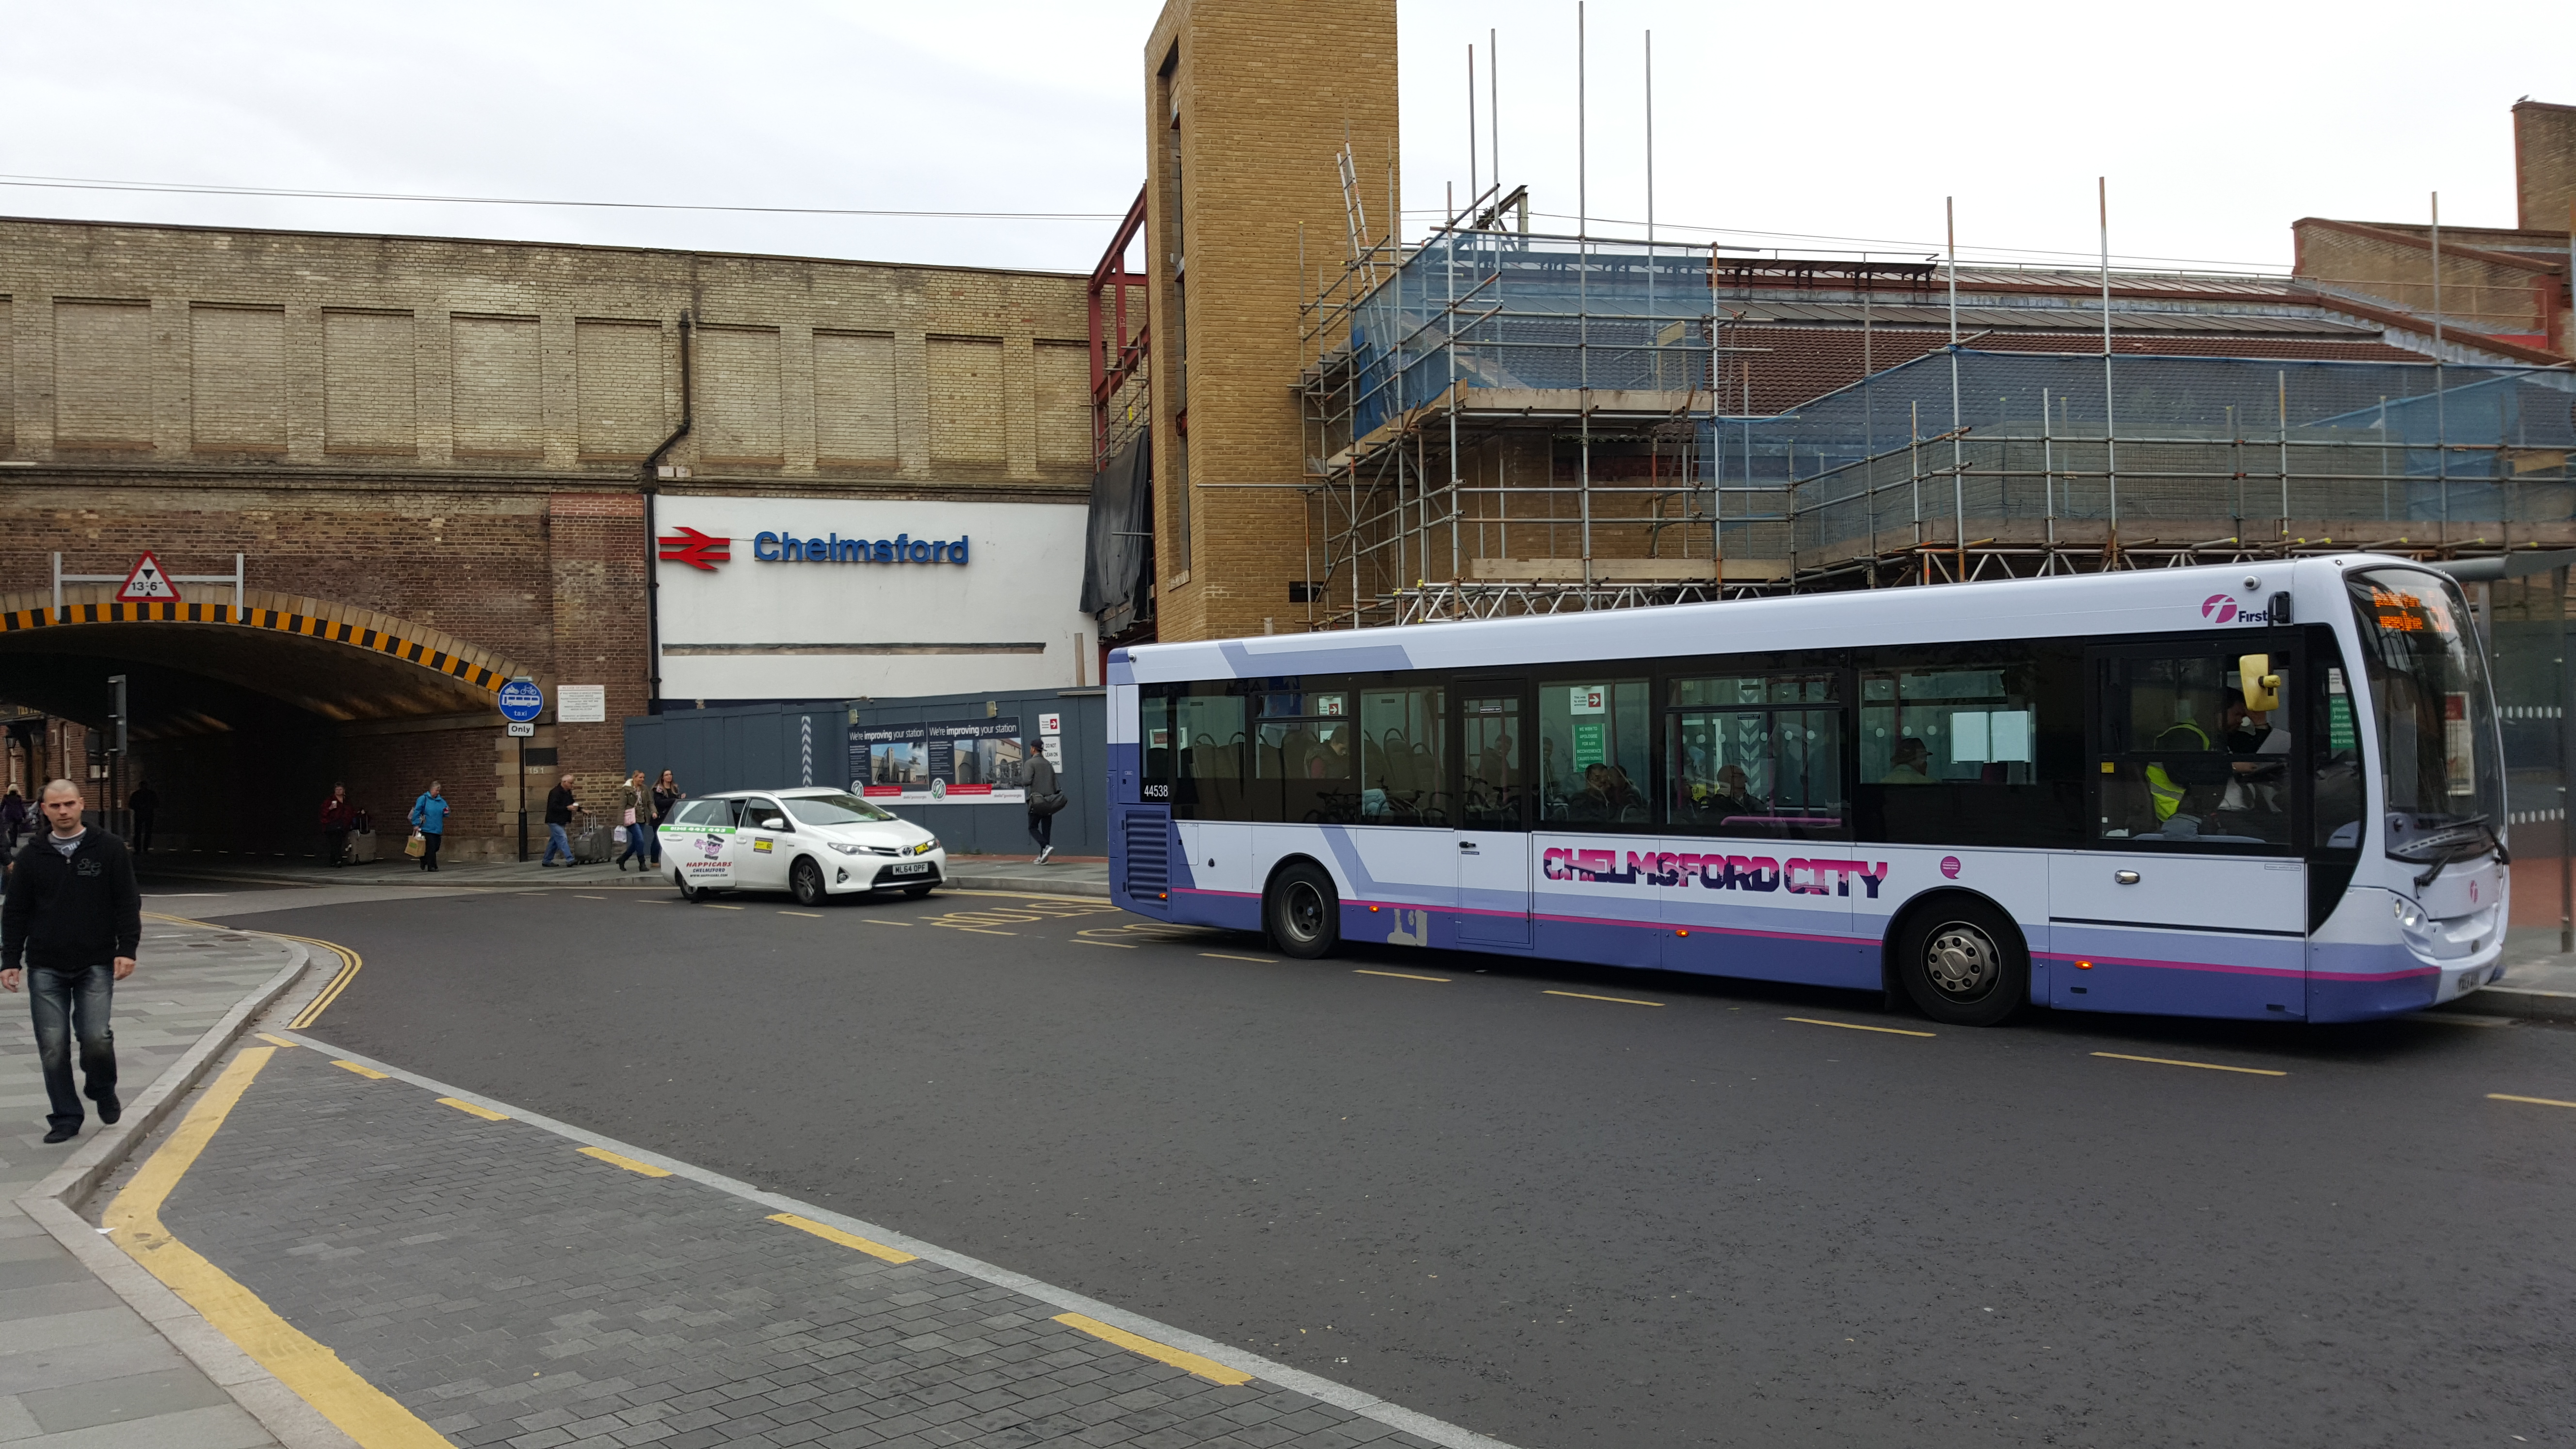 Chelmsford bus outside chelmsford railway station entrance - october 2015 - 2015-10-17 15.11.46 photo